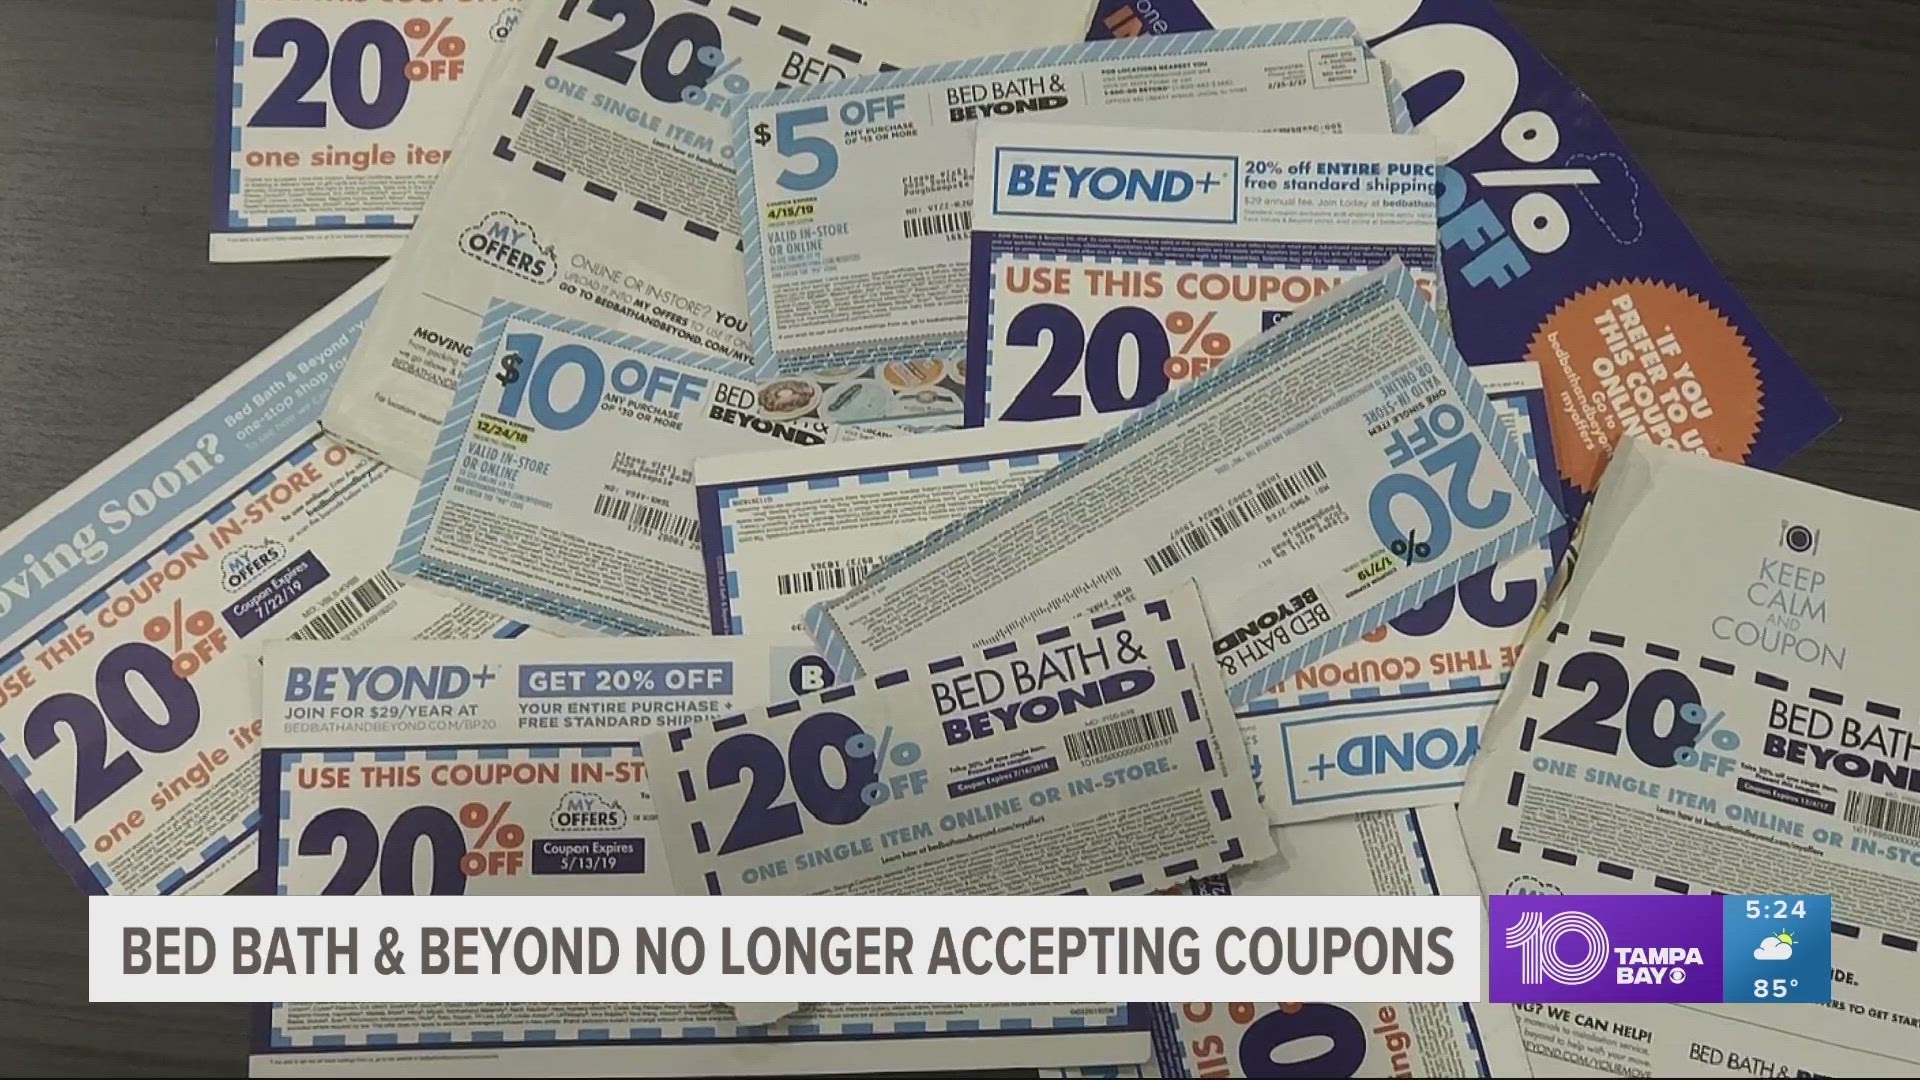 If you (or someone you know) still have a stack of those blue Bed Bath & Beyond coupons, don't throw them out yet.